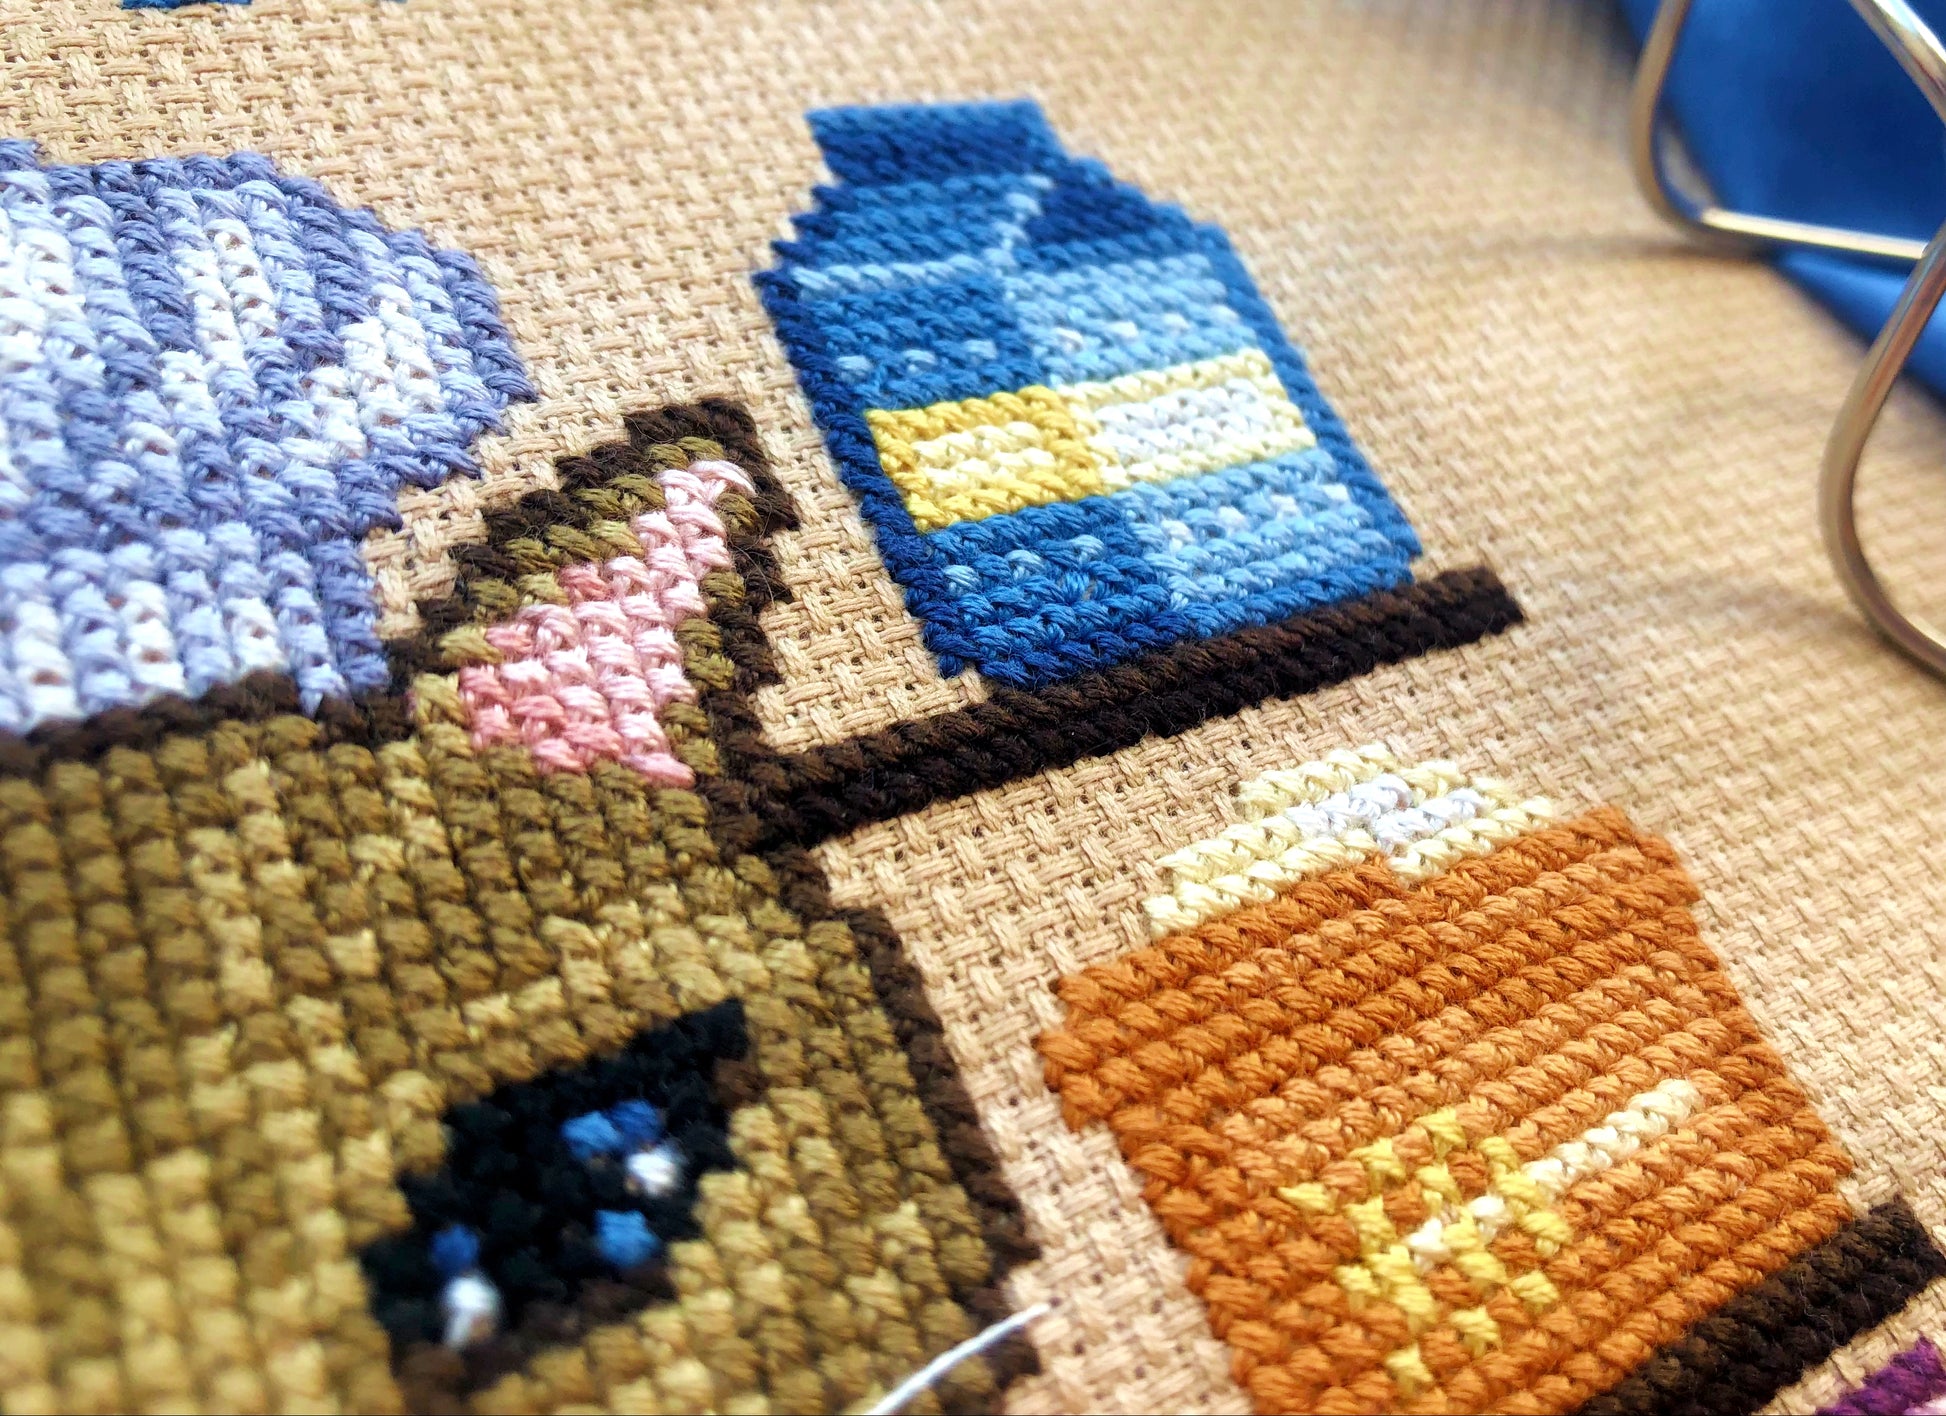 Closeup of milk carton and wheat. Stitches are fluffy and tidy. Colors are brown, orange, pink and yellow. Products are placed on shelves.